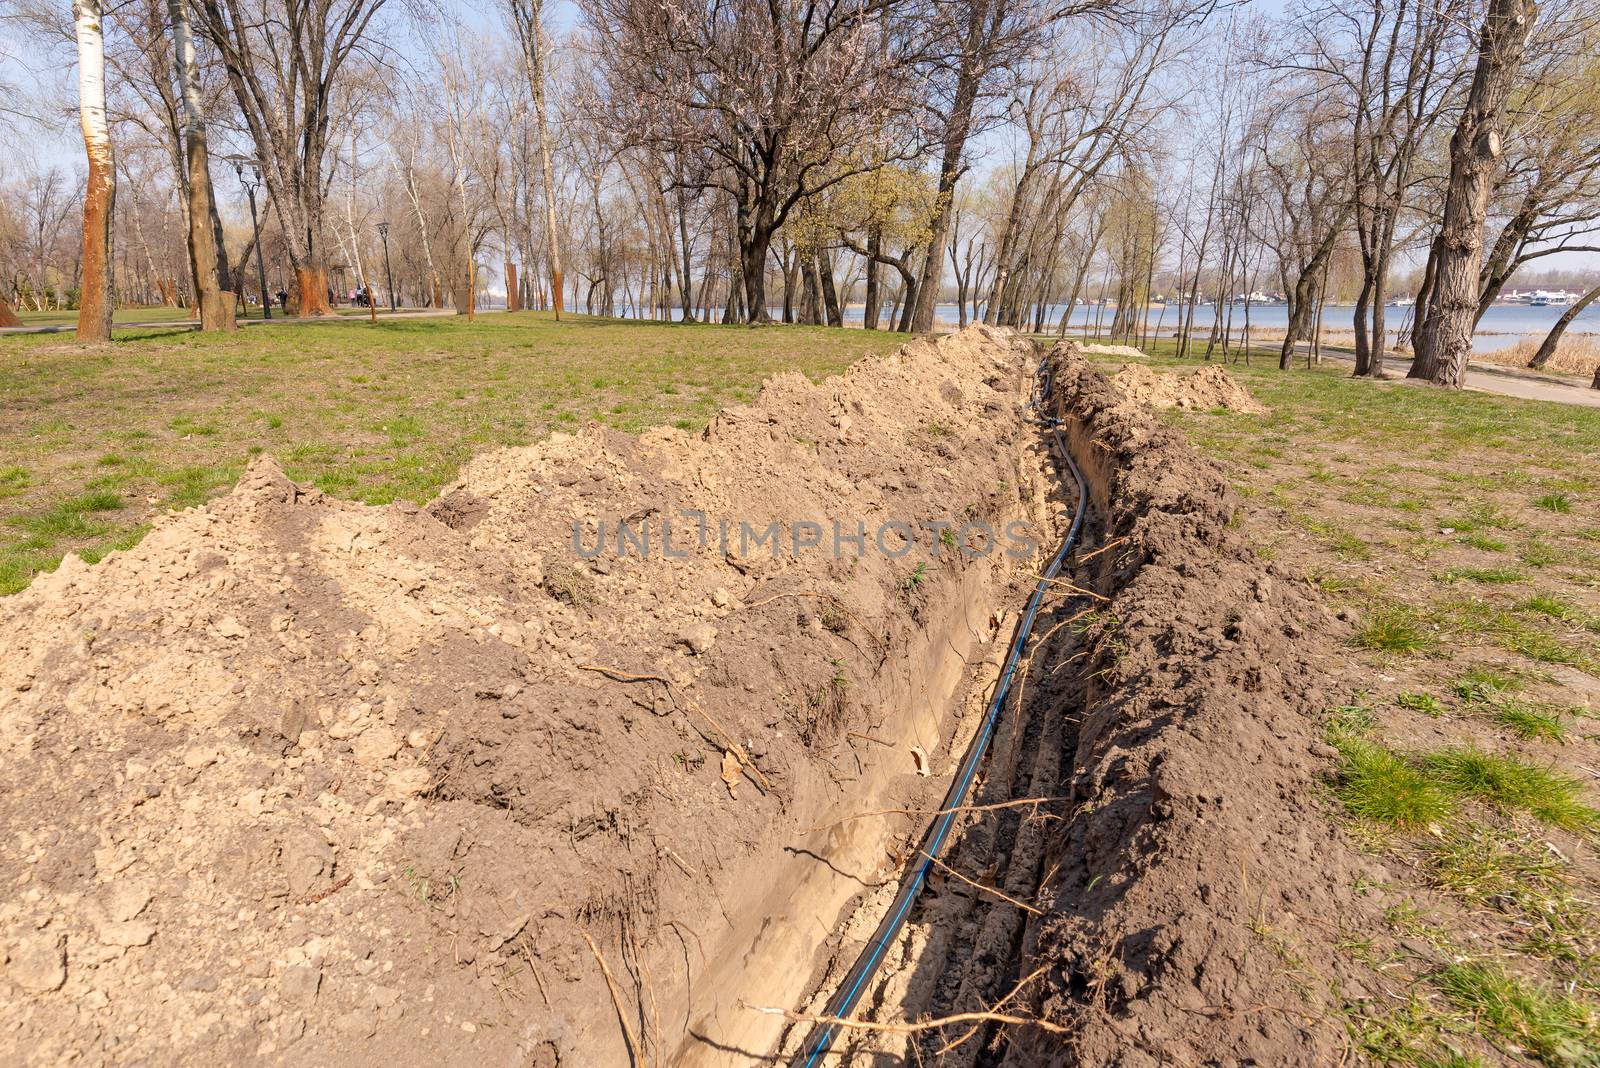 Installation of tubes for an irrigation system in the ground under the trees close to the river. Watering system in the Natalka park of Kiev, Ukraine